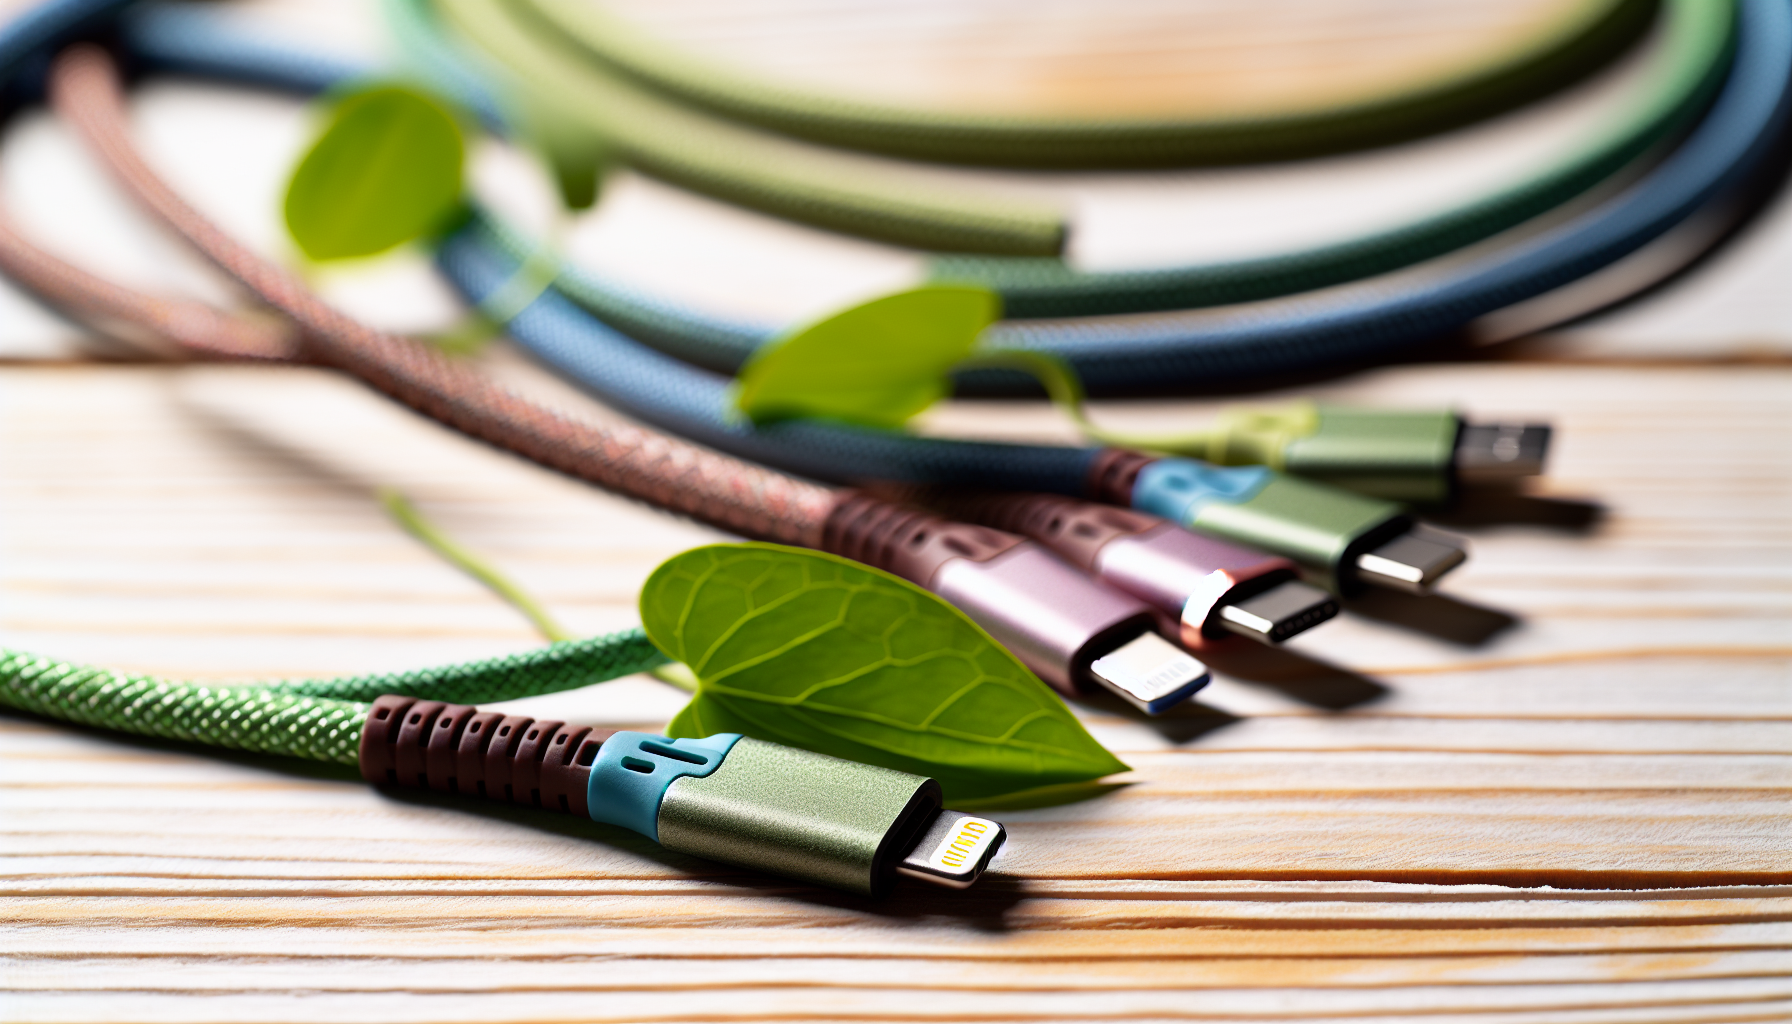 Eco-friendly USB C to Lightning cables made from bio-based materials